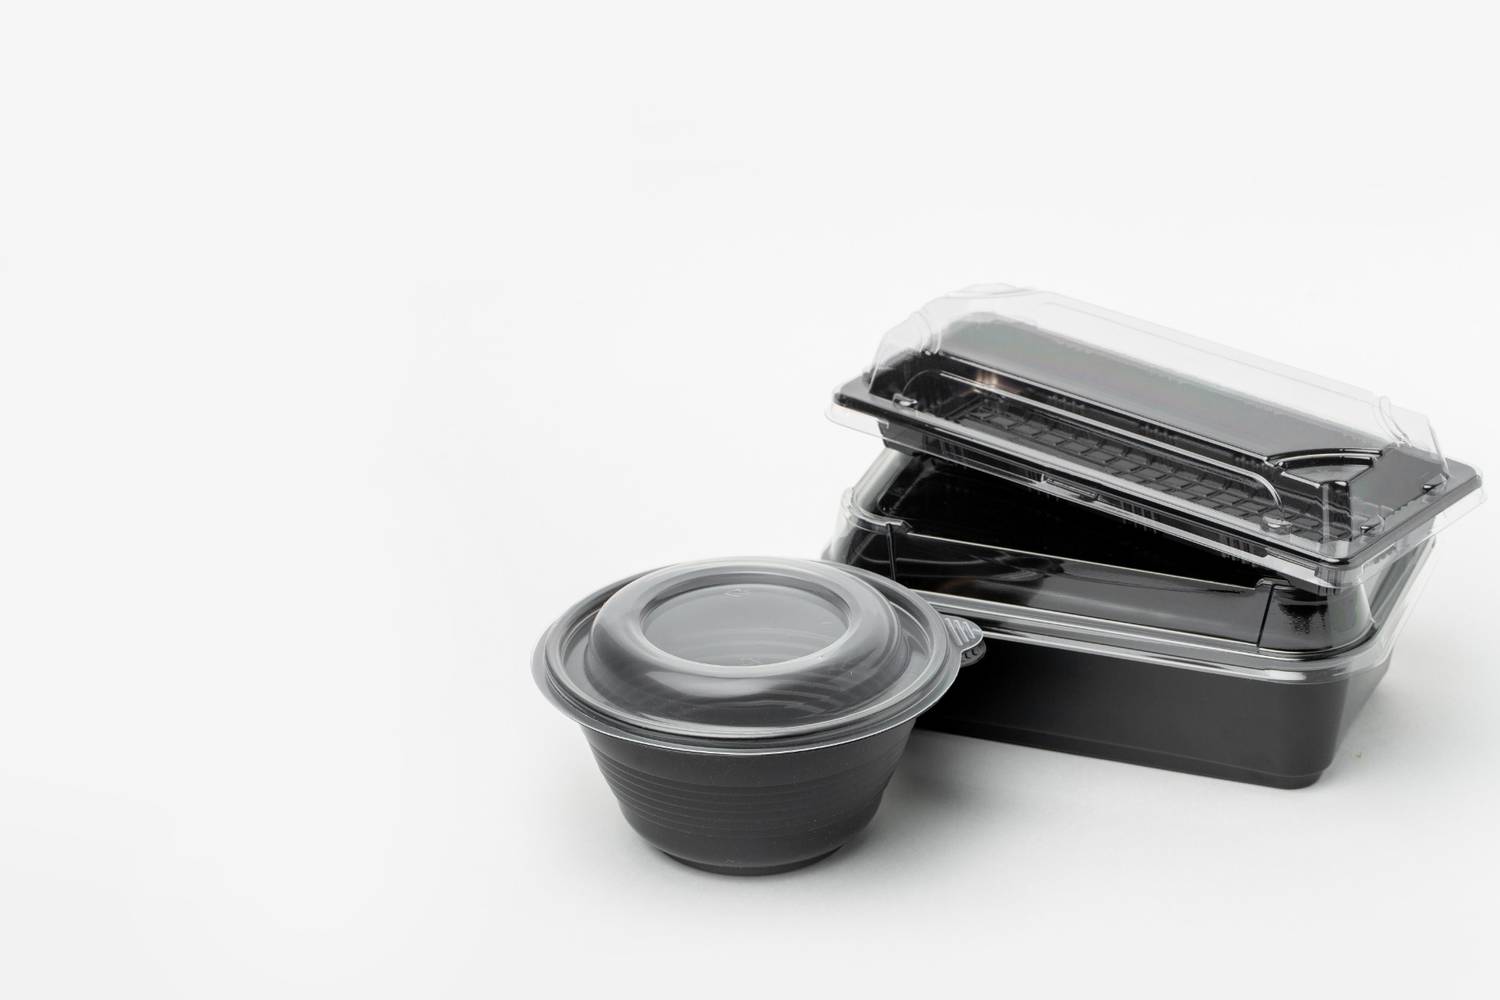 Hot Pack - 7x5 Rectangular Microwaveable Combo Container, Black - 150ct (1 Unit per Case)